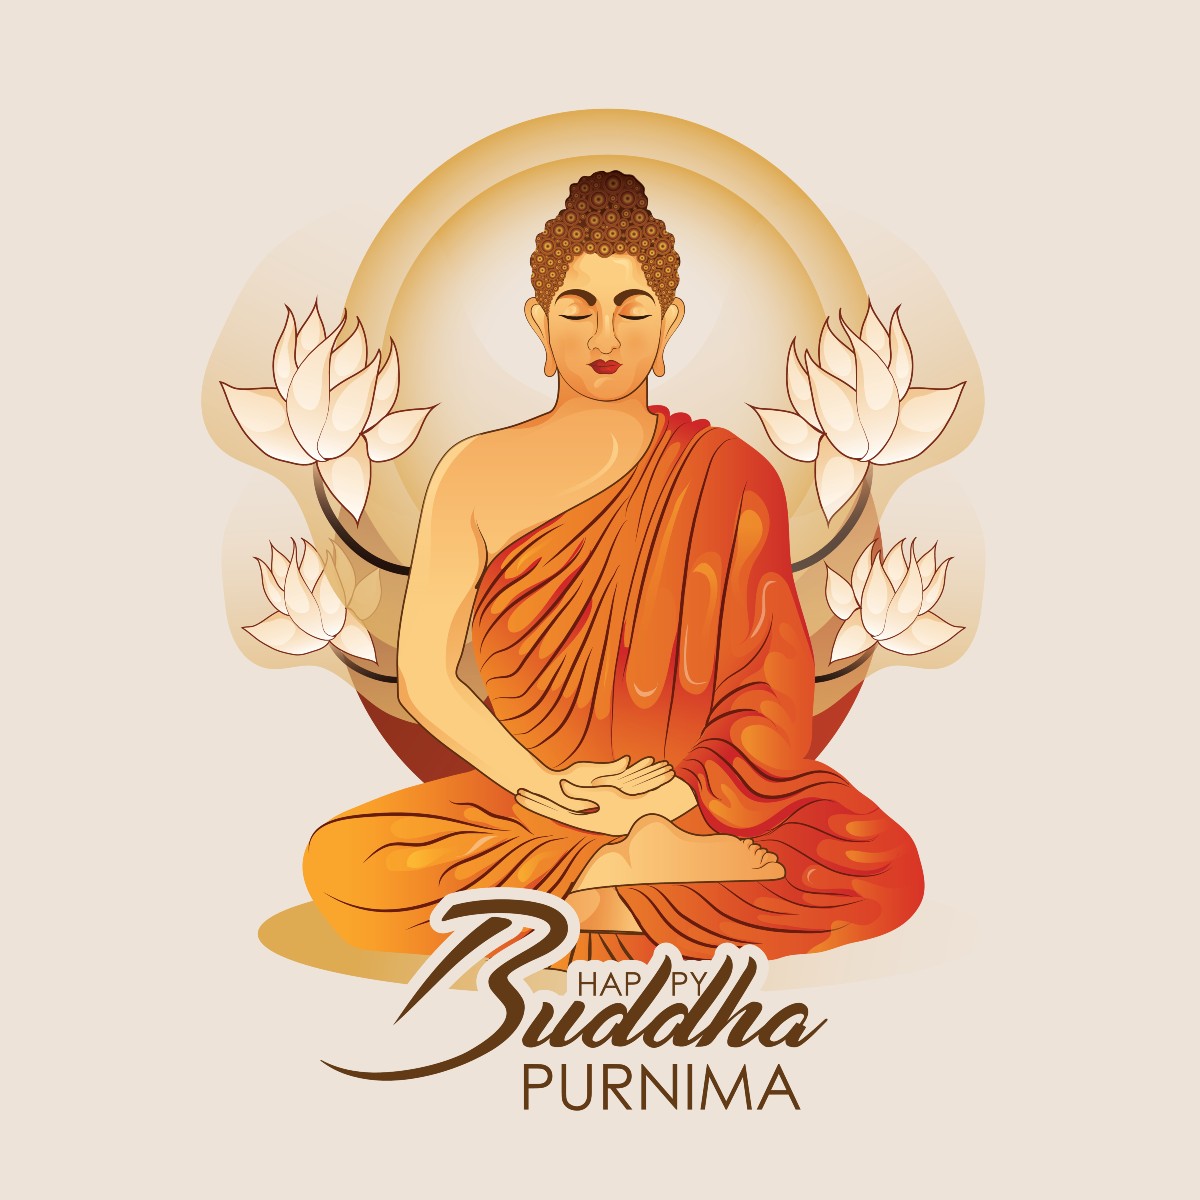 Happy Buddha Purnima 2021: Images, Wishes and Messages to Share on ...